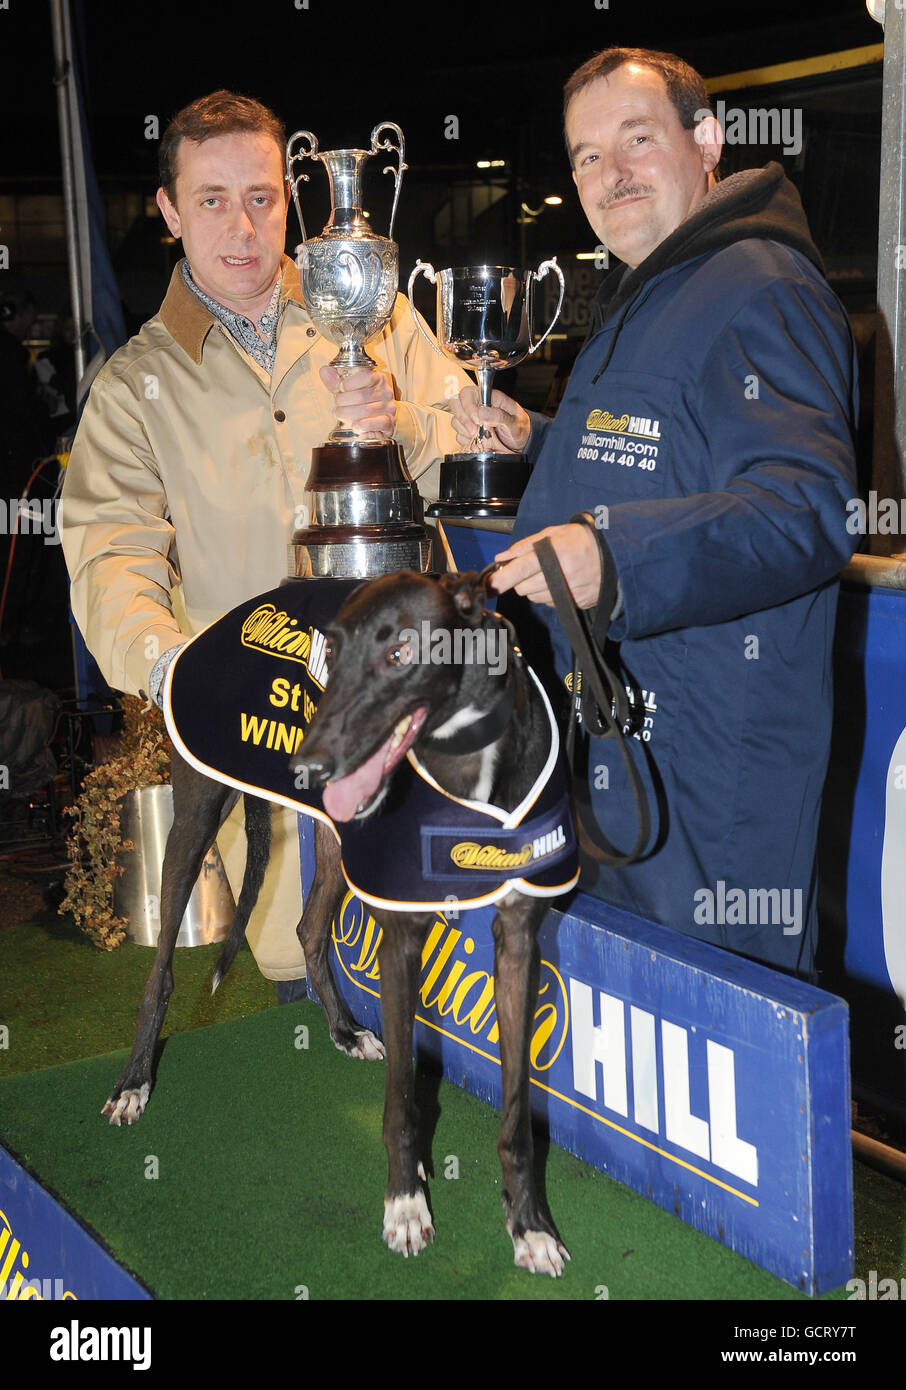 Trainer Paul Donovan (left) and head kennel man Ray Tibos (right) celebrate after Droopys Bradley won the Williamhill.com St Leger Final at Wimbledon Greyhound stadium, London. Stock Photo